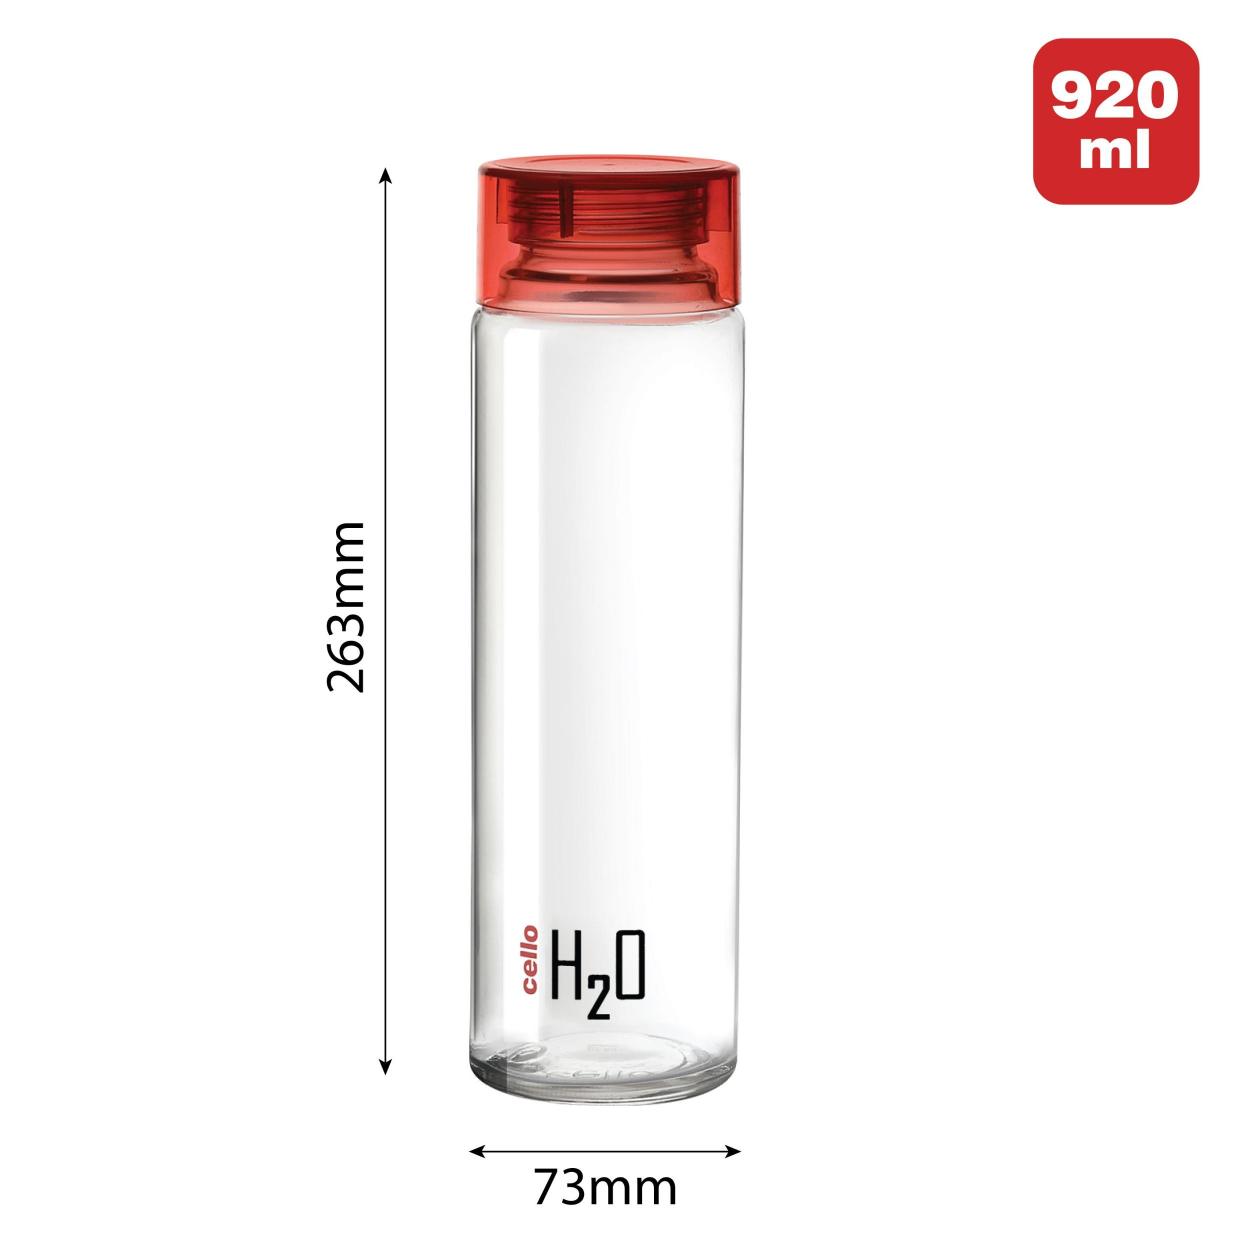 H2O Glass Water Bottle with Plastic Cap, 920ml Red / 920ml / 3 Pieces